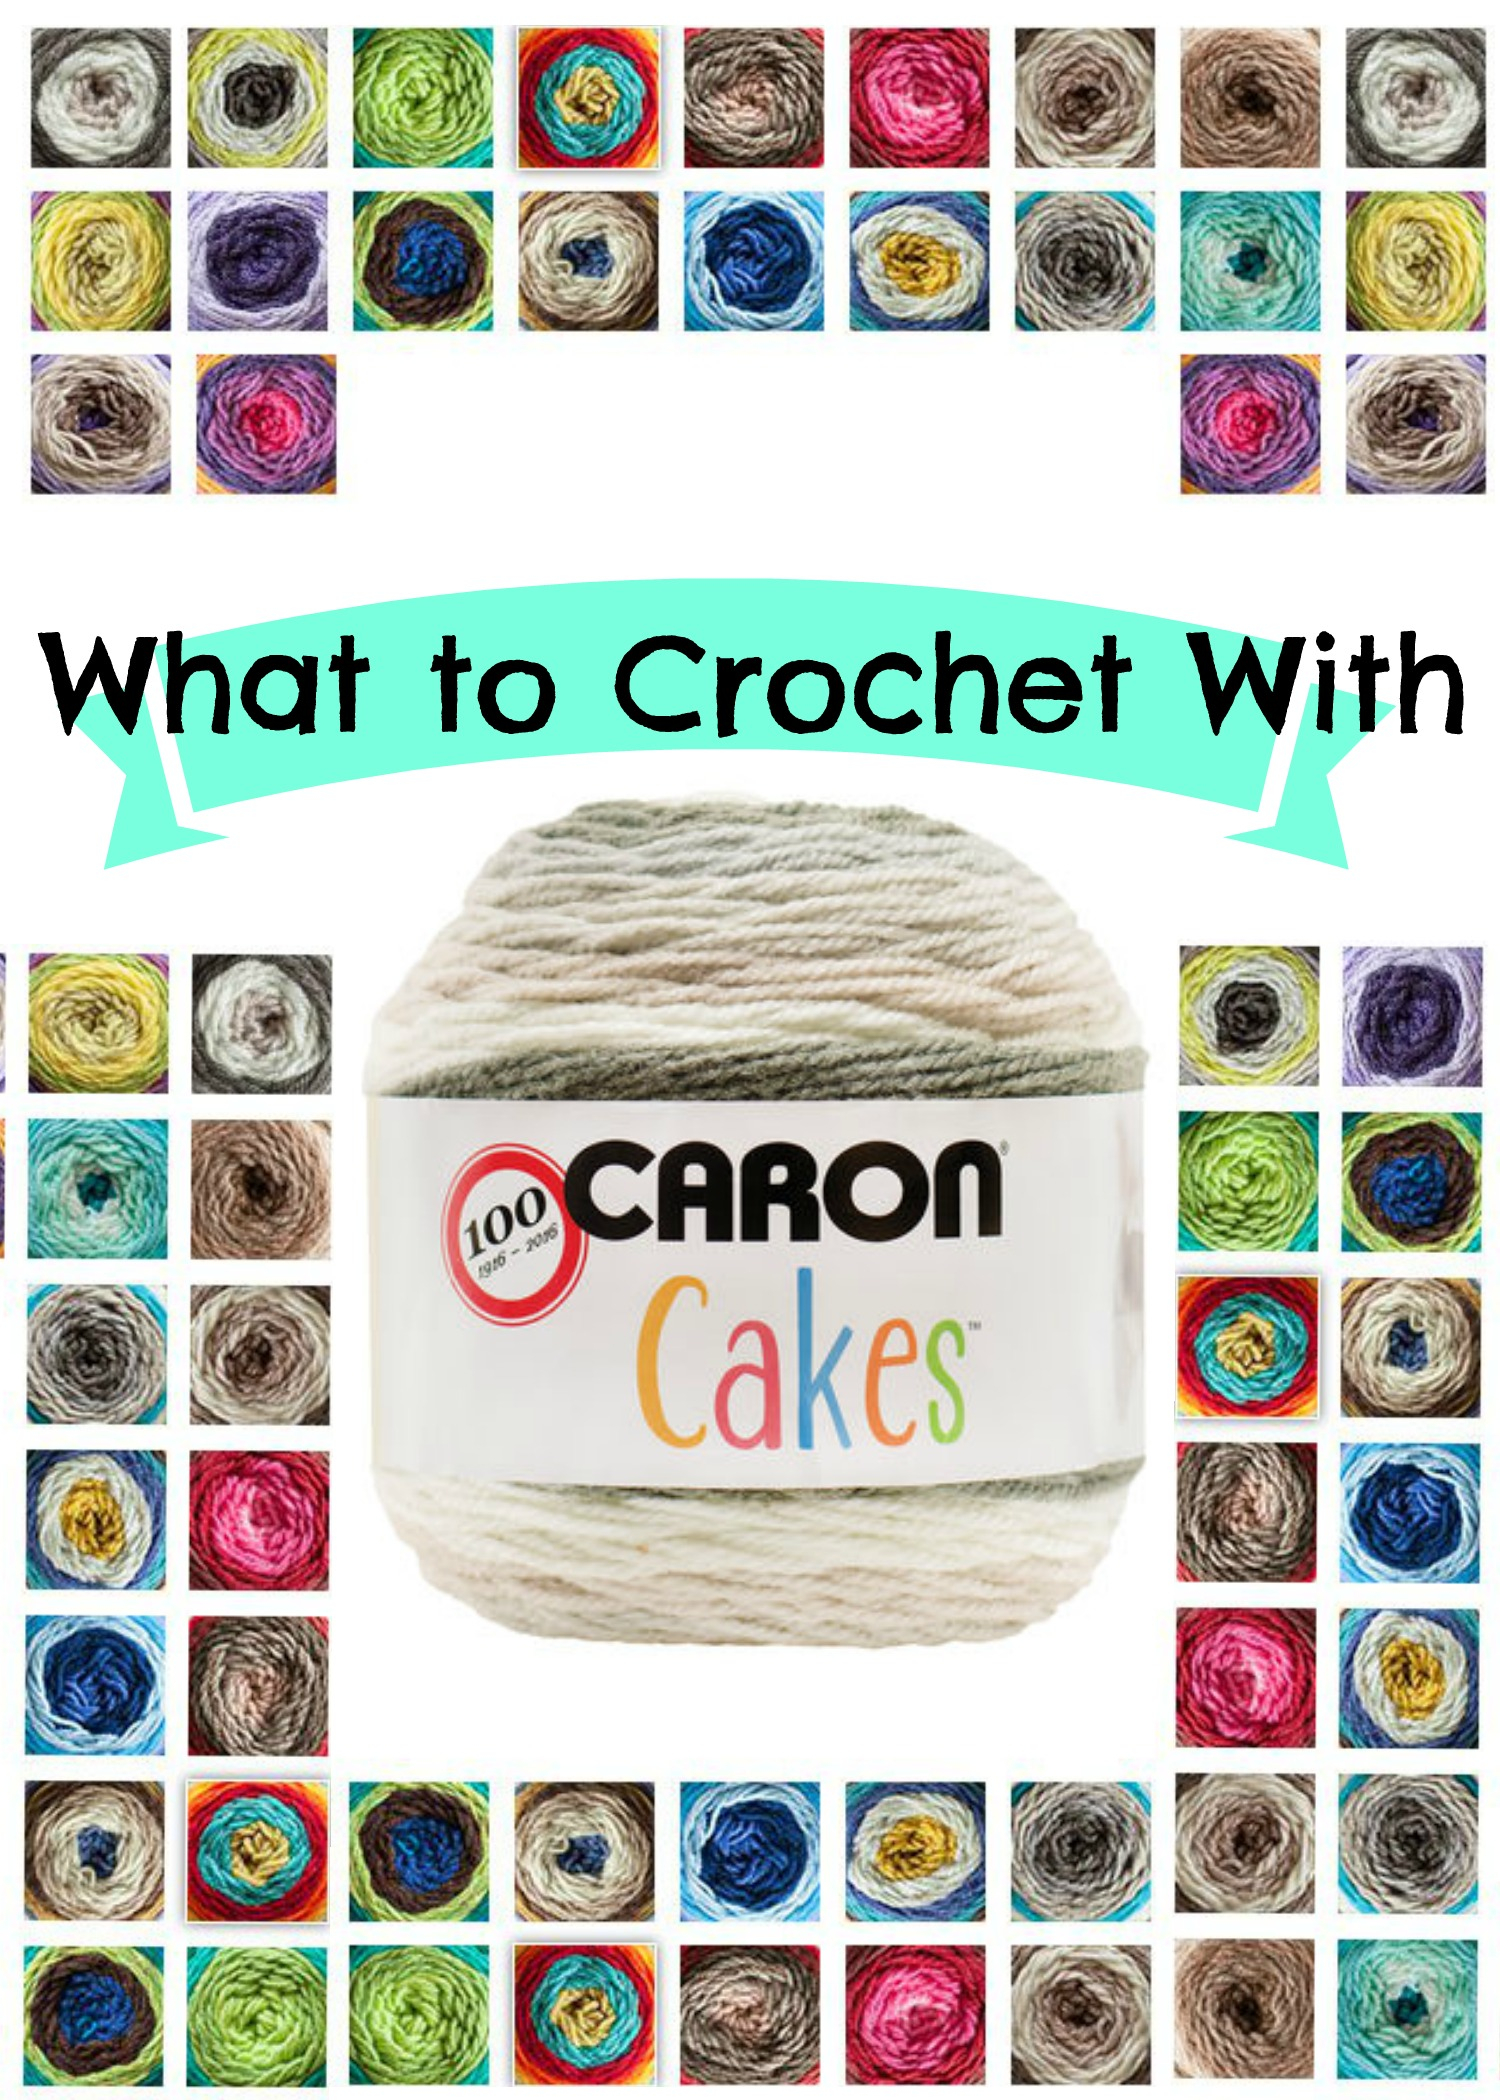 Caron Crochet Patterns What To Crochet With Caron Cakes Yarn Happily Hooked